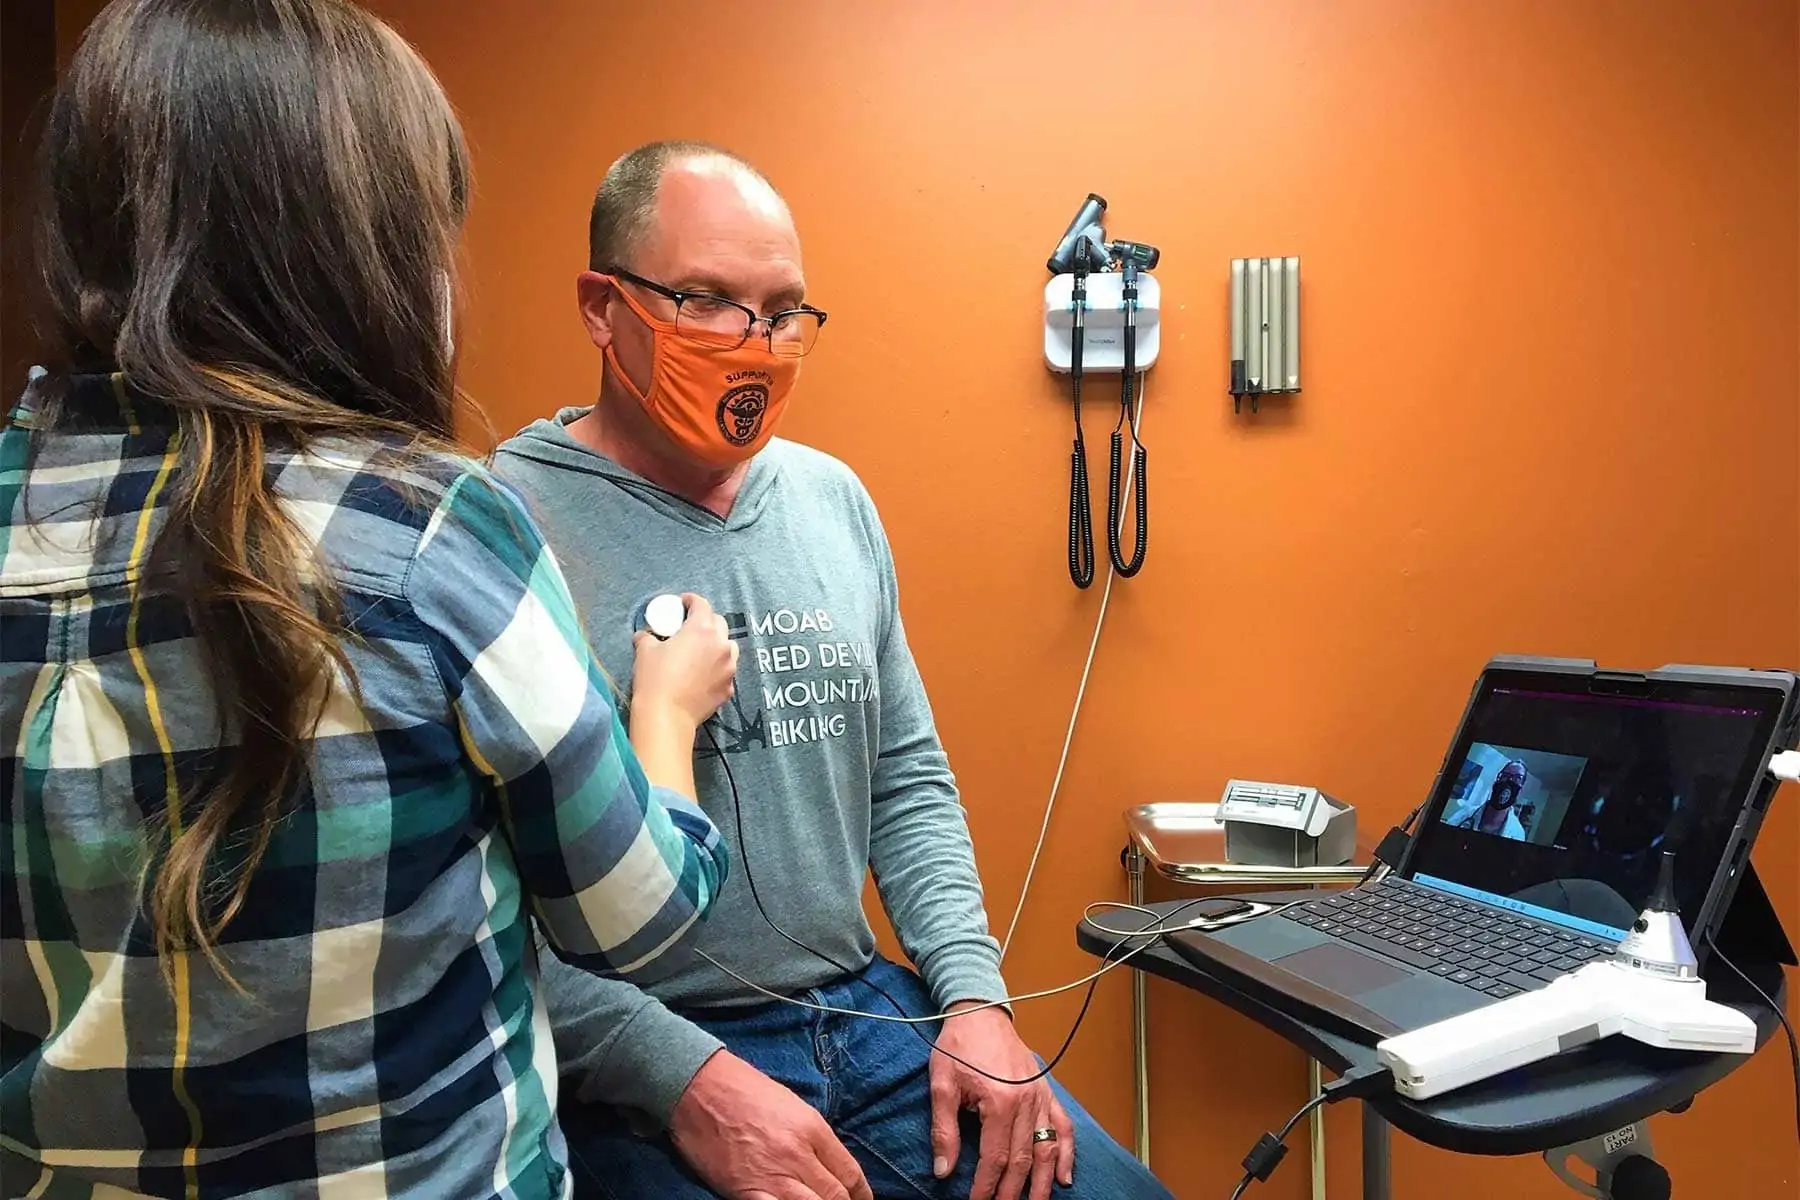 Clinic staff at Moab Free Health Clinic in Moab, Utah, learn to use telehealth equipment during a training supported by Americares COVID-19 telehealth grant funding. Photo courtesy of Moab Free Health Clinic.